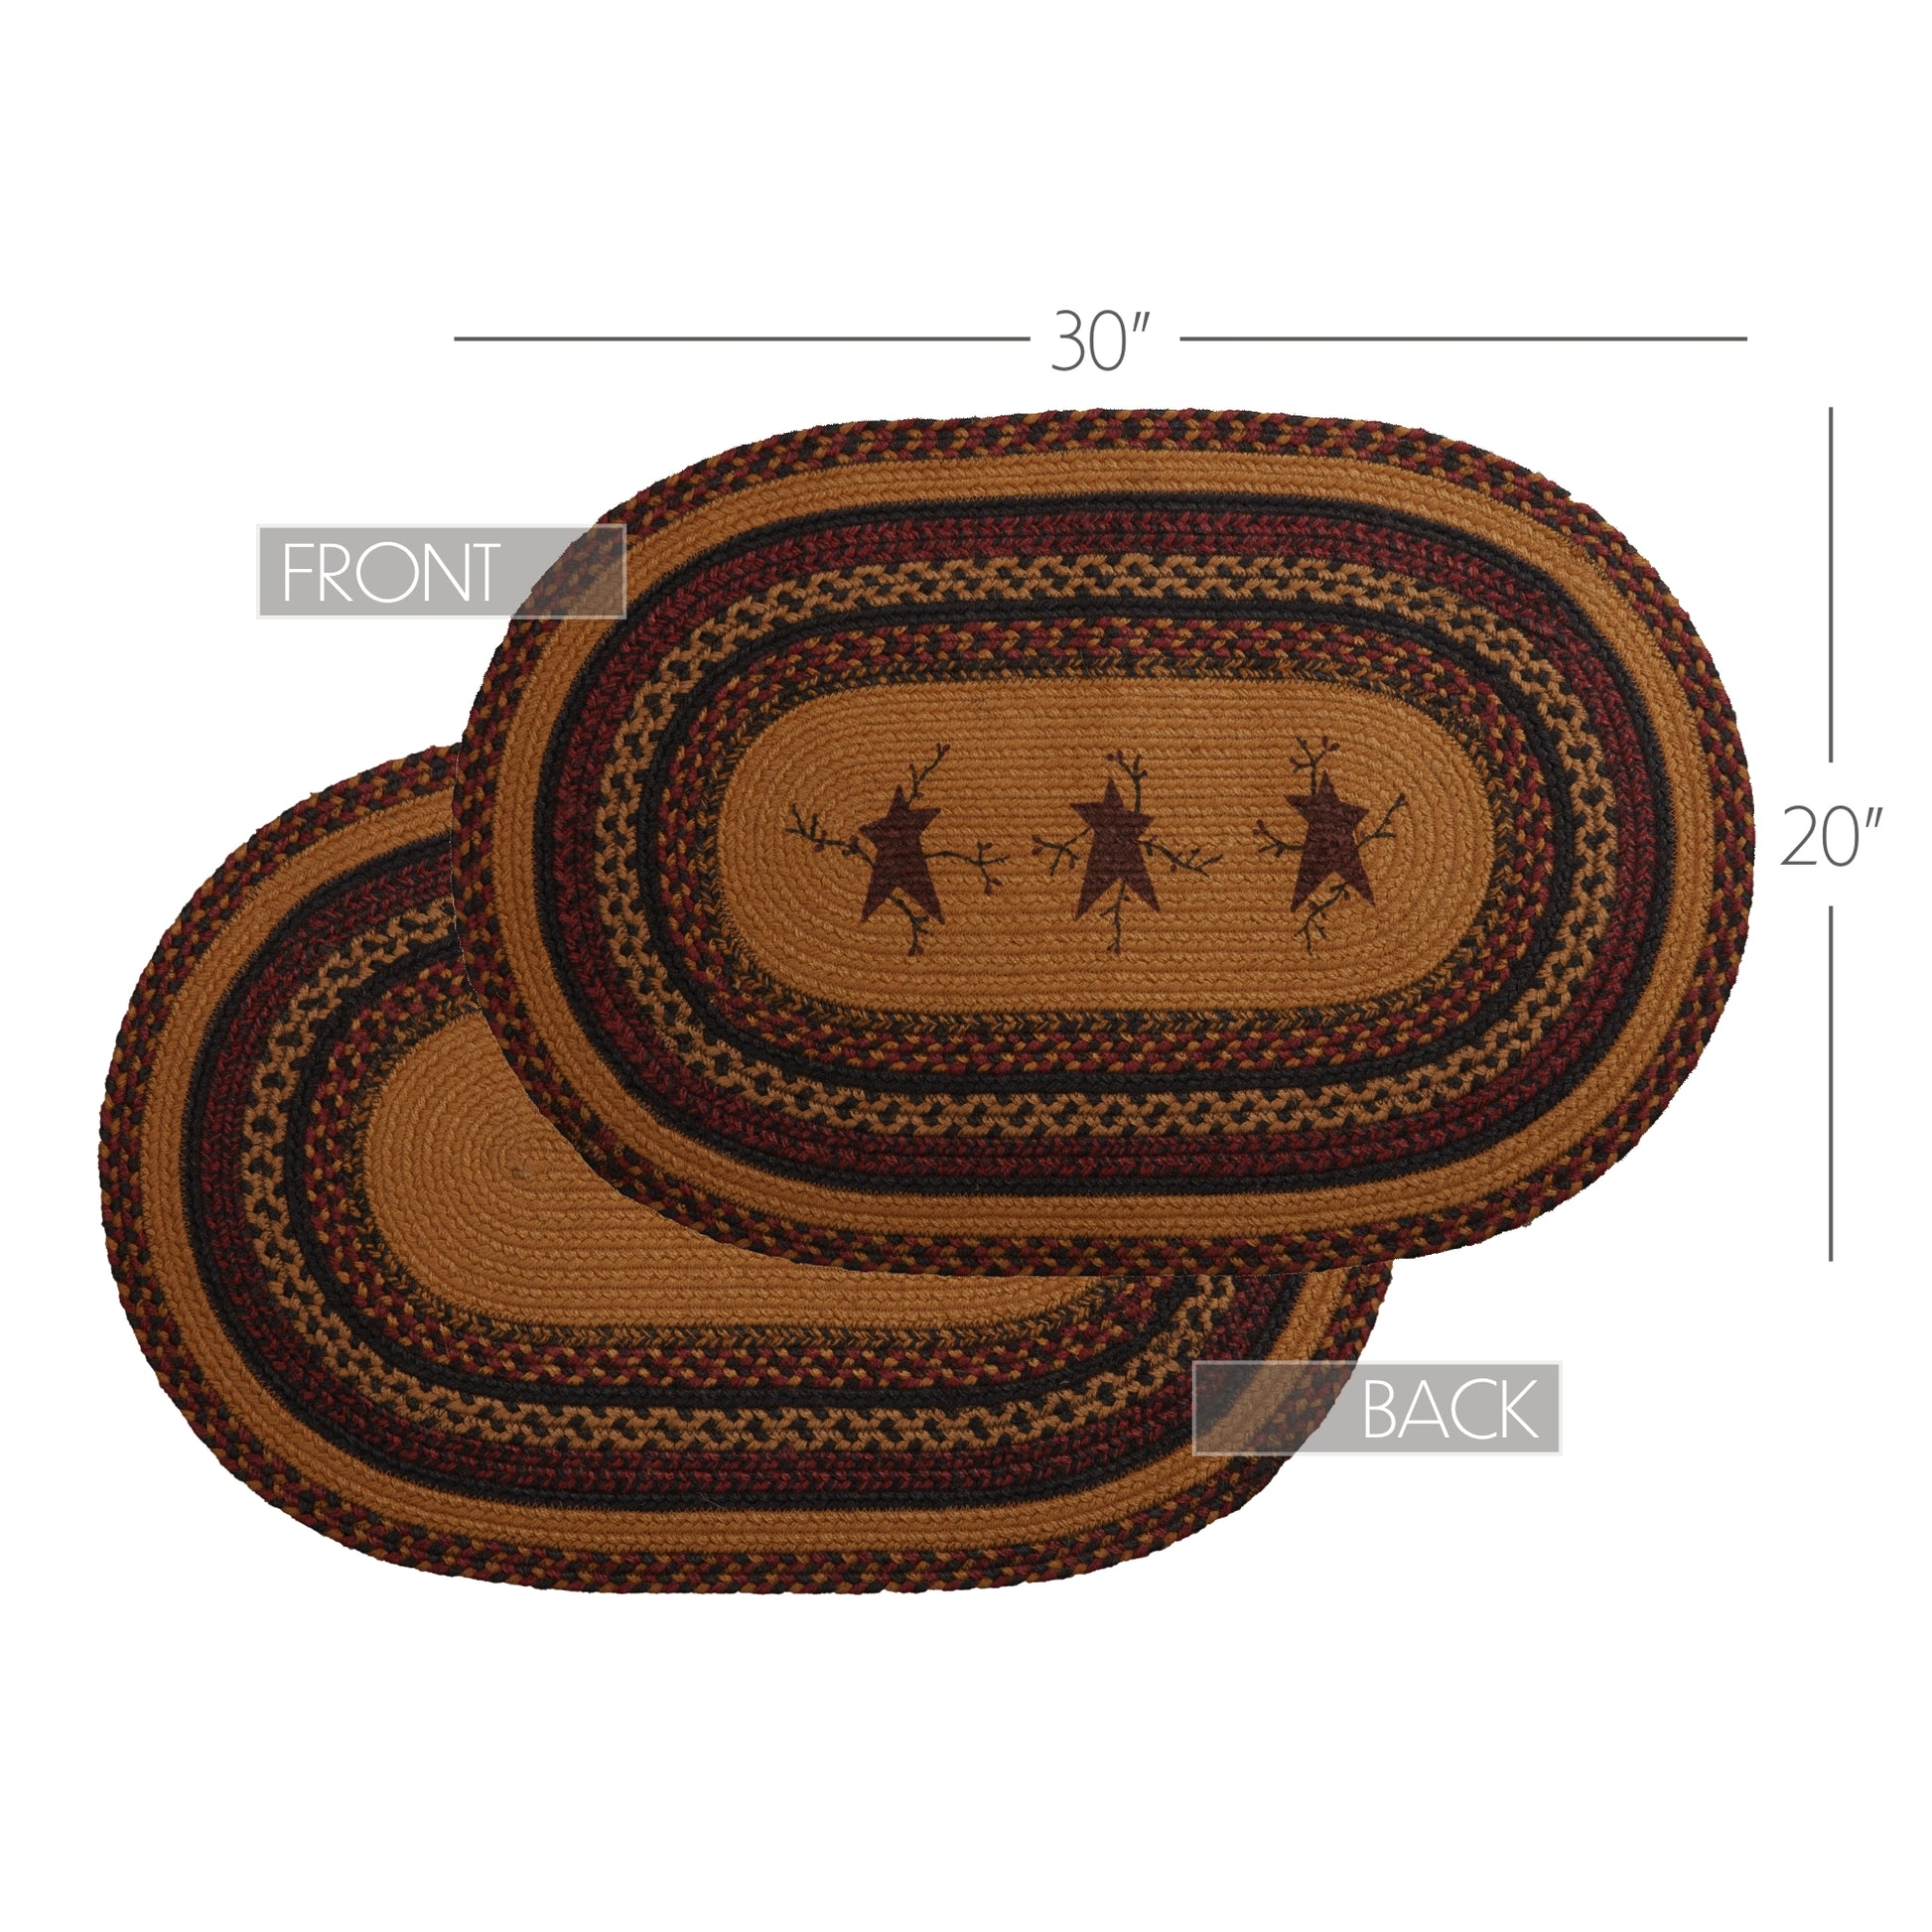 69446-Heritage-Farms-Star-and-Pip-Jute-Rug-Oval-w-Pad-20x30-image-9